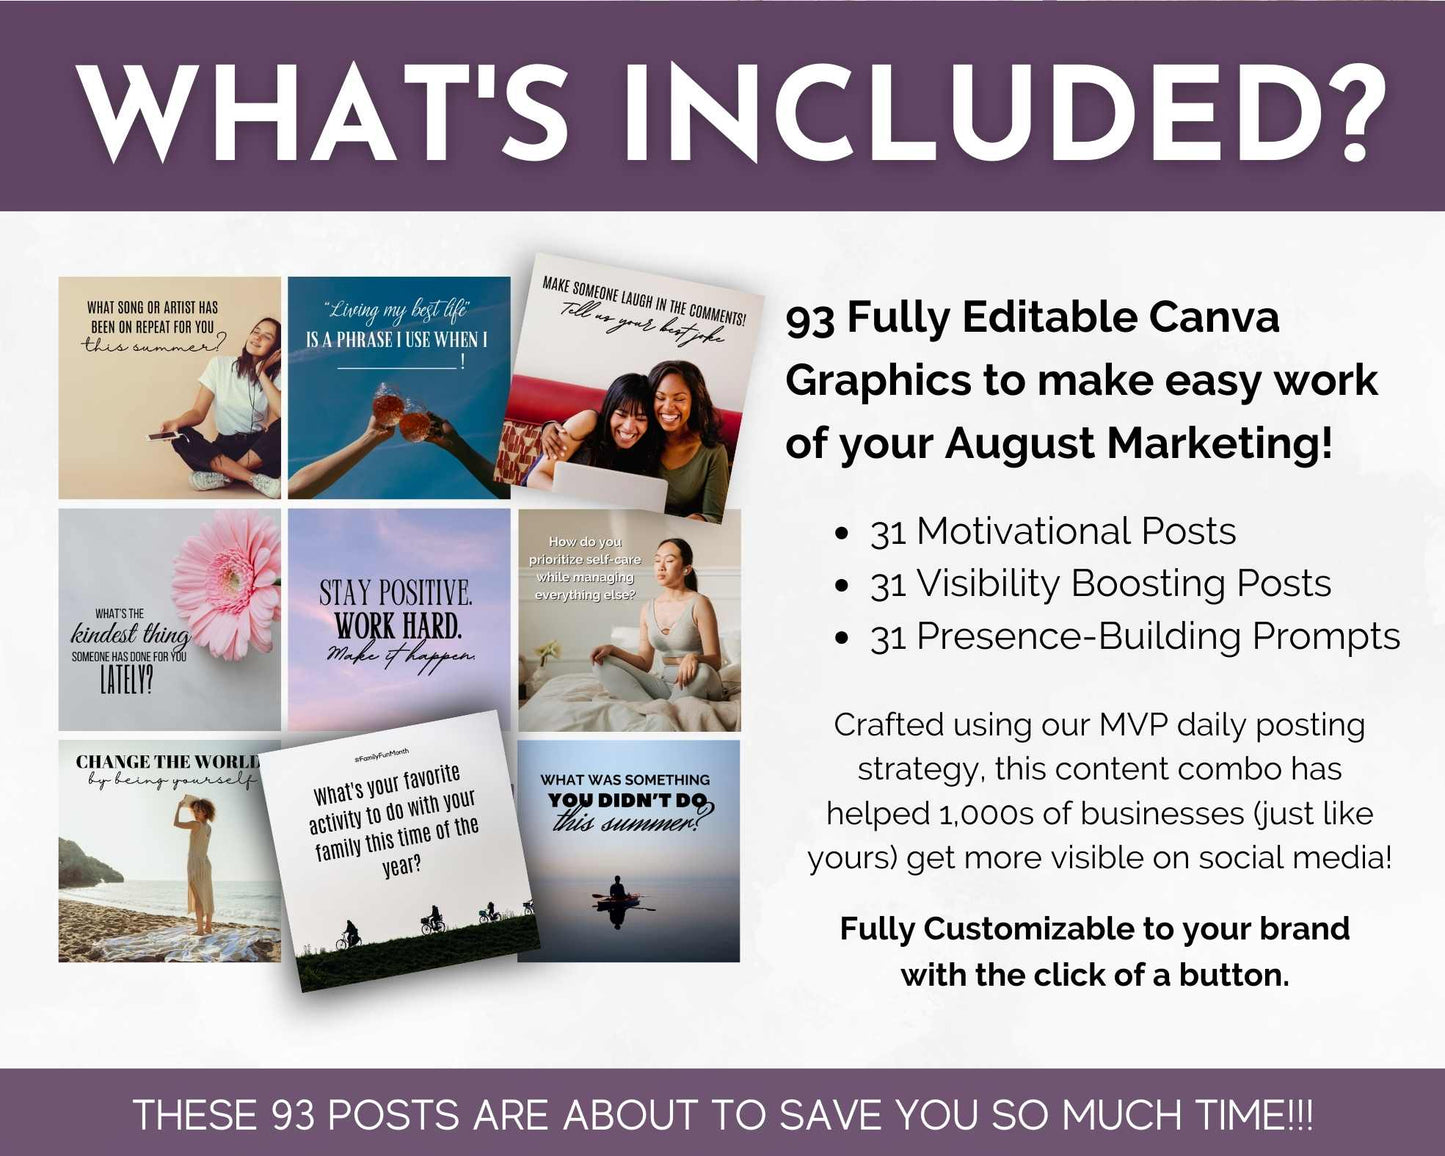 Promotional graphic detailing the contents of an AUGUST Daily Posting Plan - Your Social Plan marketing package from Get Socially Inclined: 93 editable Canva graphics including 31 motivational daily social media posts, 31 visibility boosting posts, and 31 presence-building prompts.